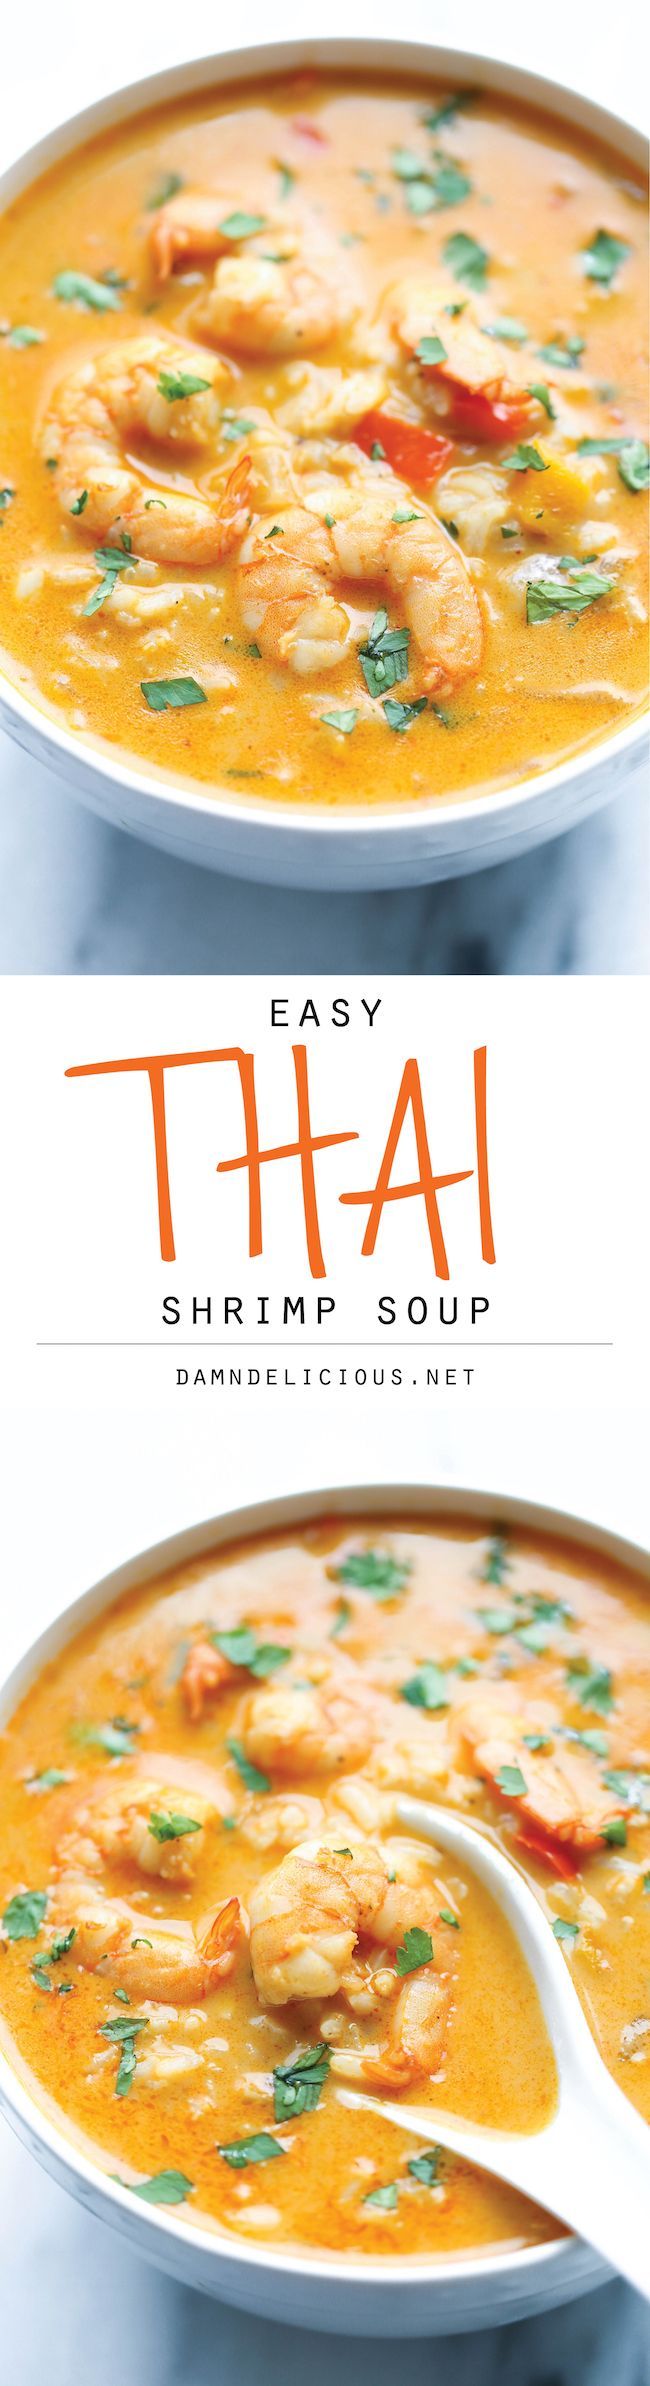 Easy Thai Shrimp Soup – Skip the take-out and try making this at home – it’s unbelievably easy and 10000x tastier and healthier!